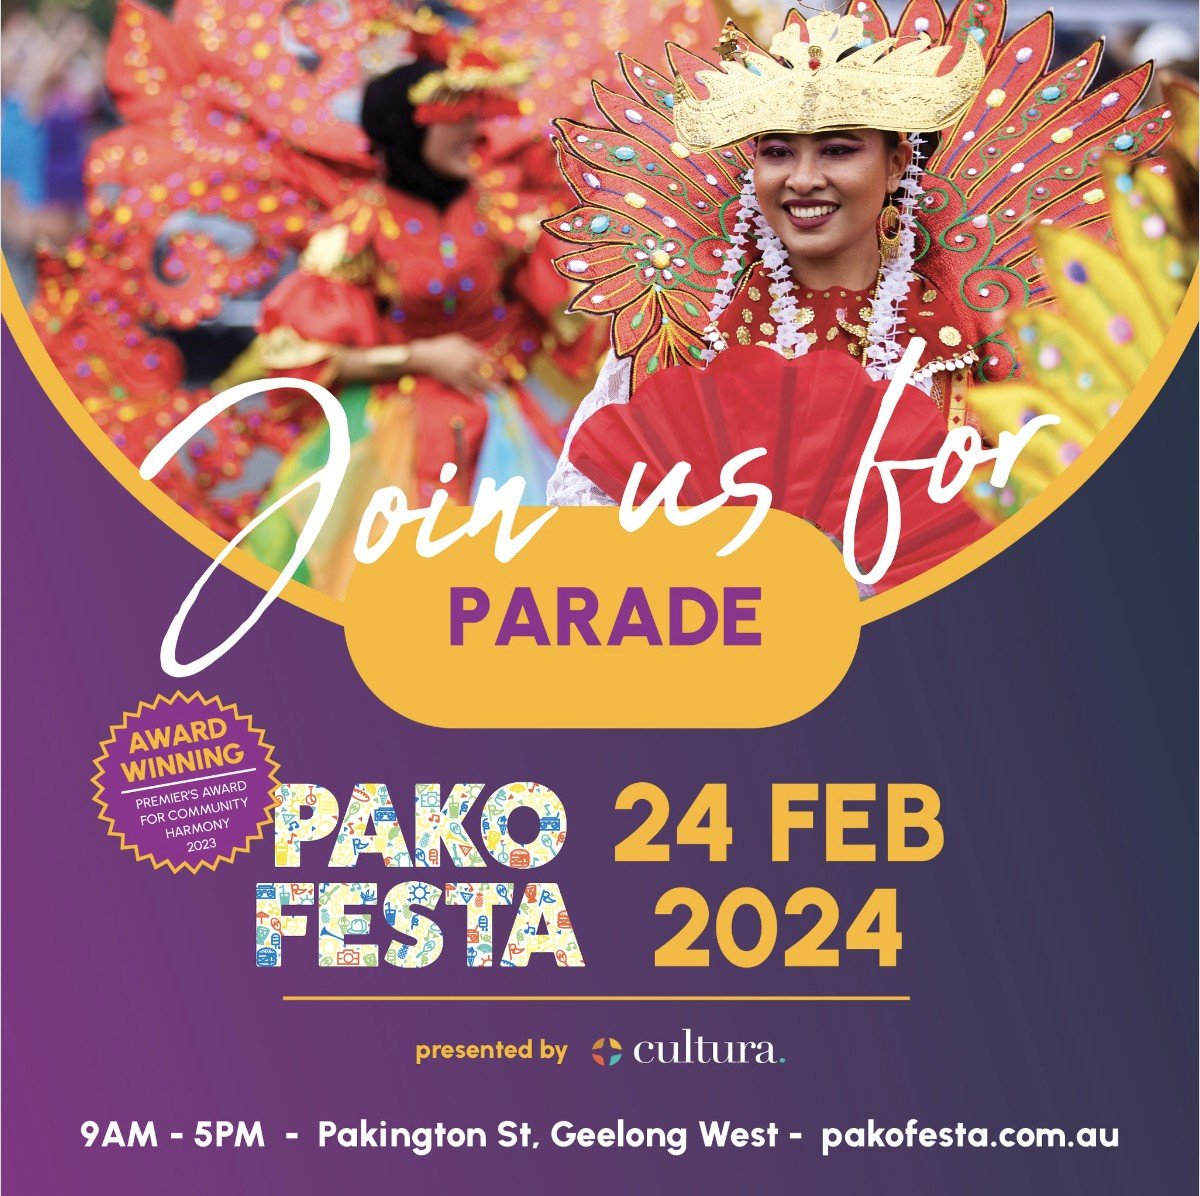 Come down and see us perform tomorrow at PAKO FESTA!

Our Youth Company and Lehenda Ukrainian Dance Company will be performing in the parade at 11am alongside @ukrainiansingeelong .
Then check out our stage performance with Level 4 and Youth Company 